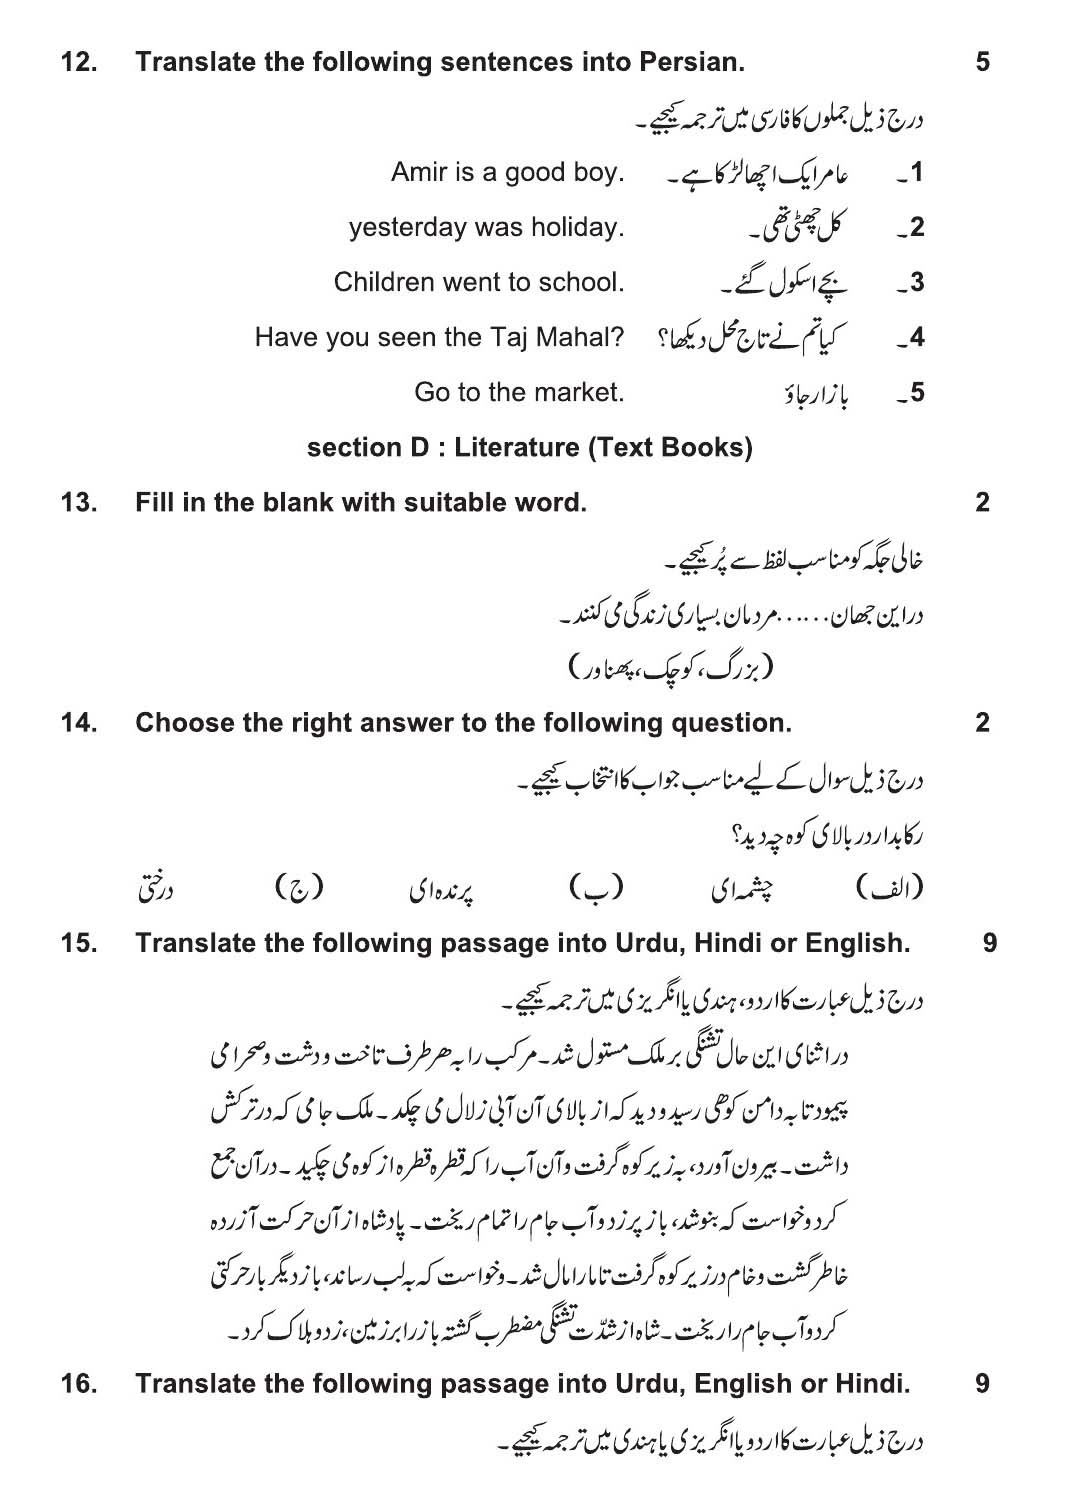 Persian CBSE Class X Sample Question Paper 2018-19 - Image 3